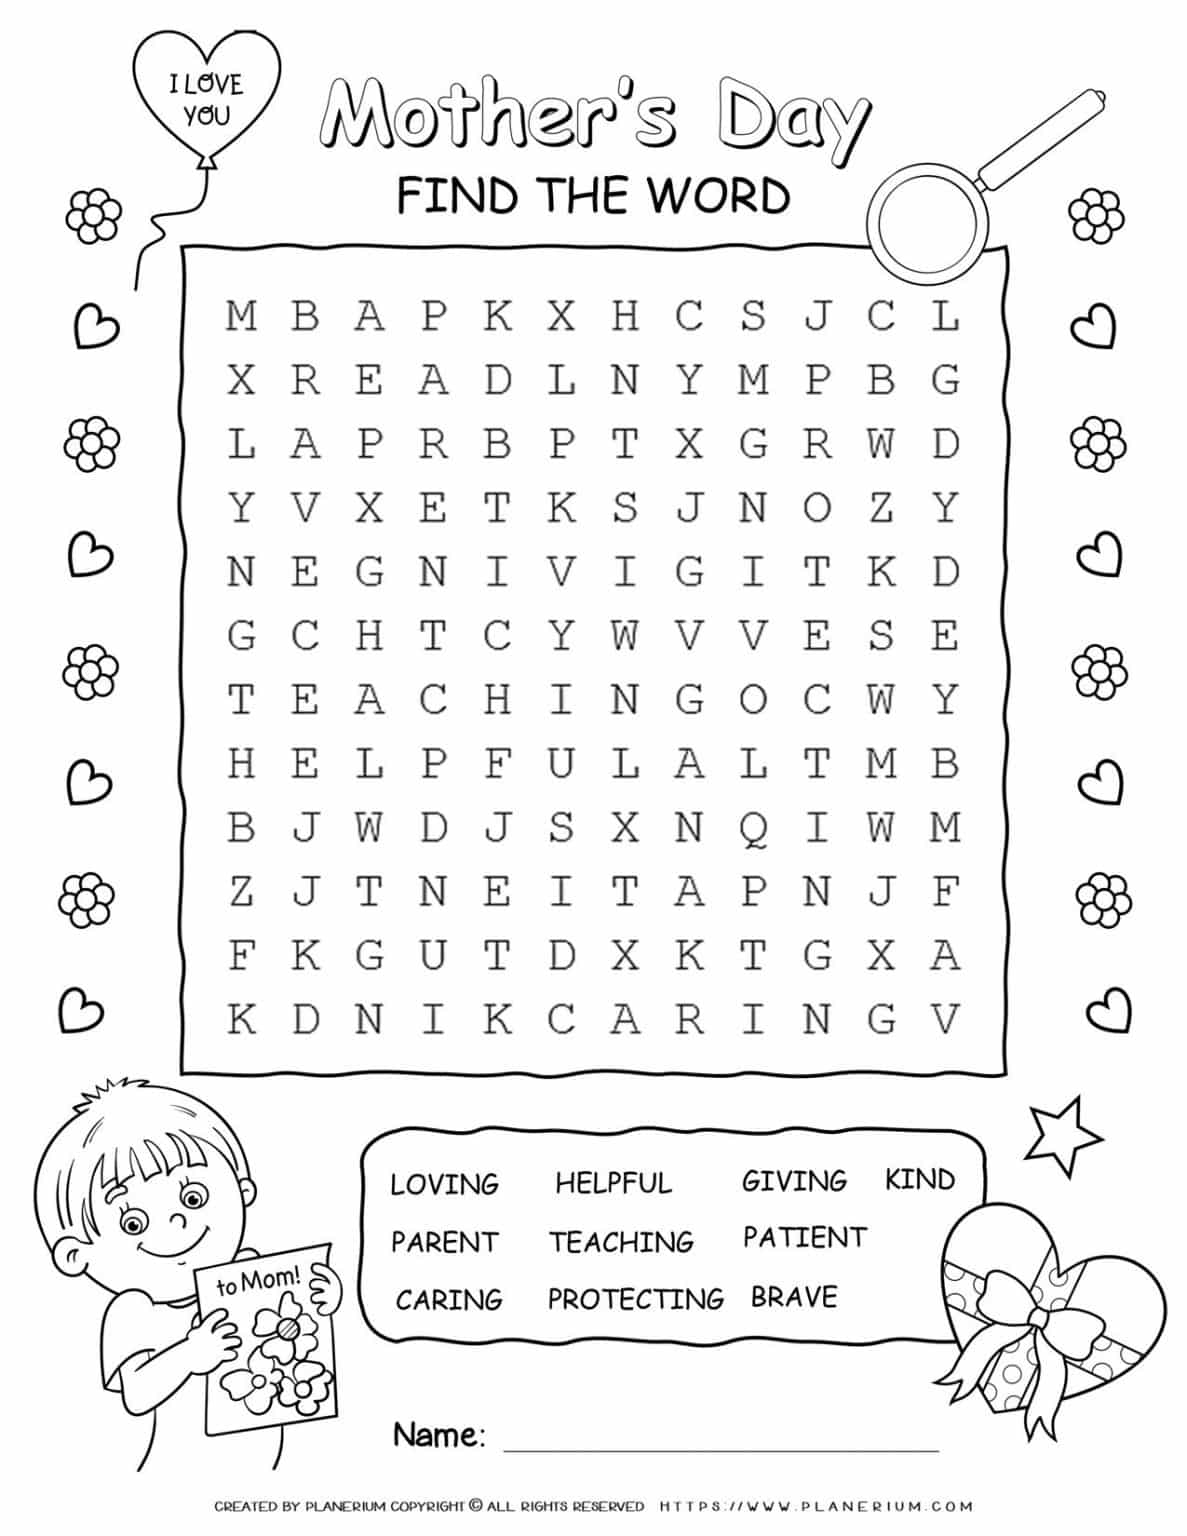 Mother's Day Word Search Puzzles Printable